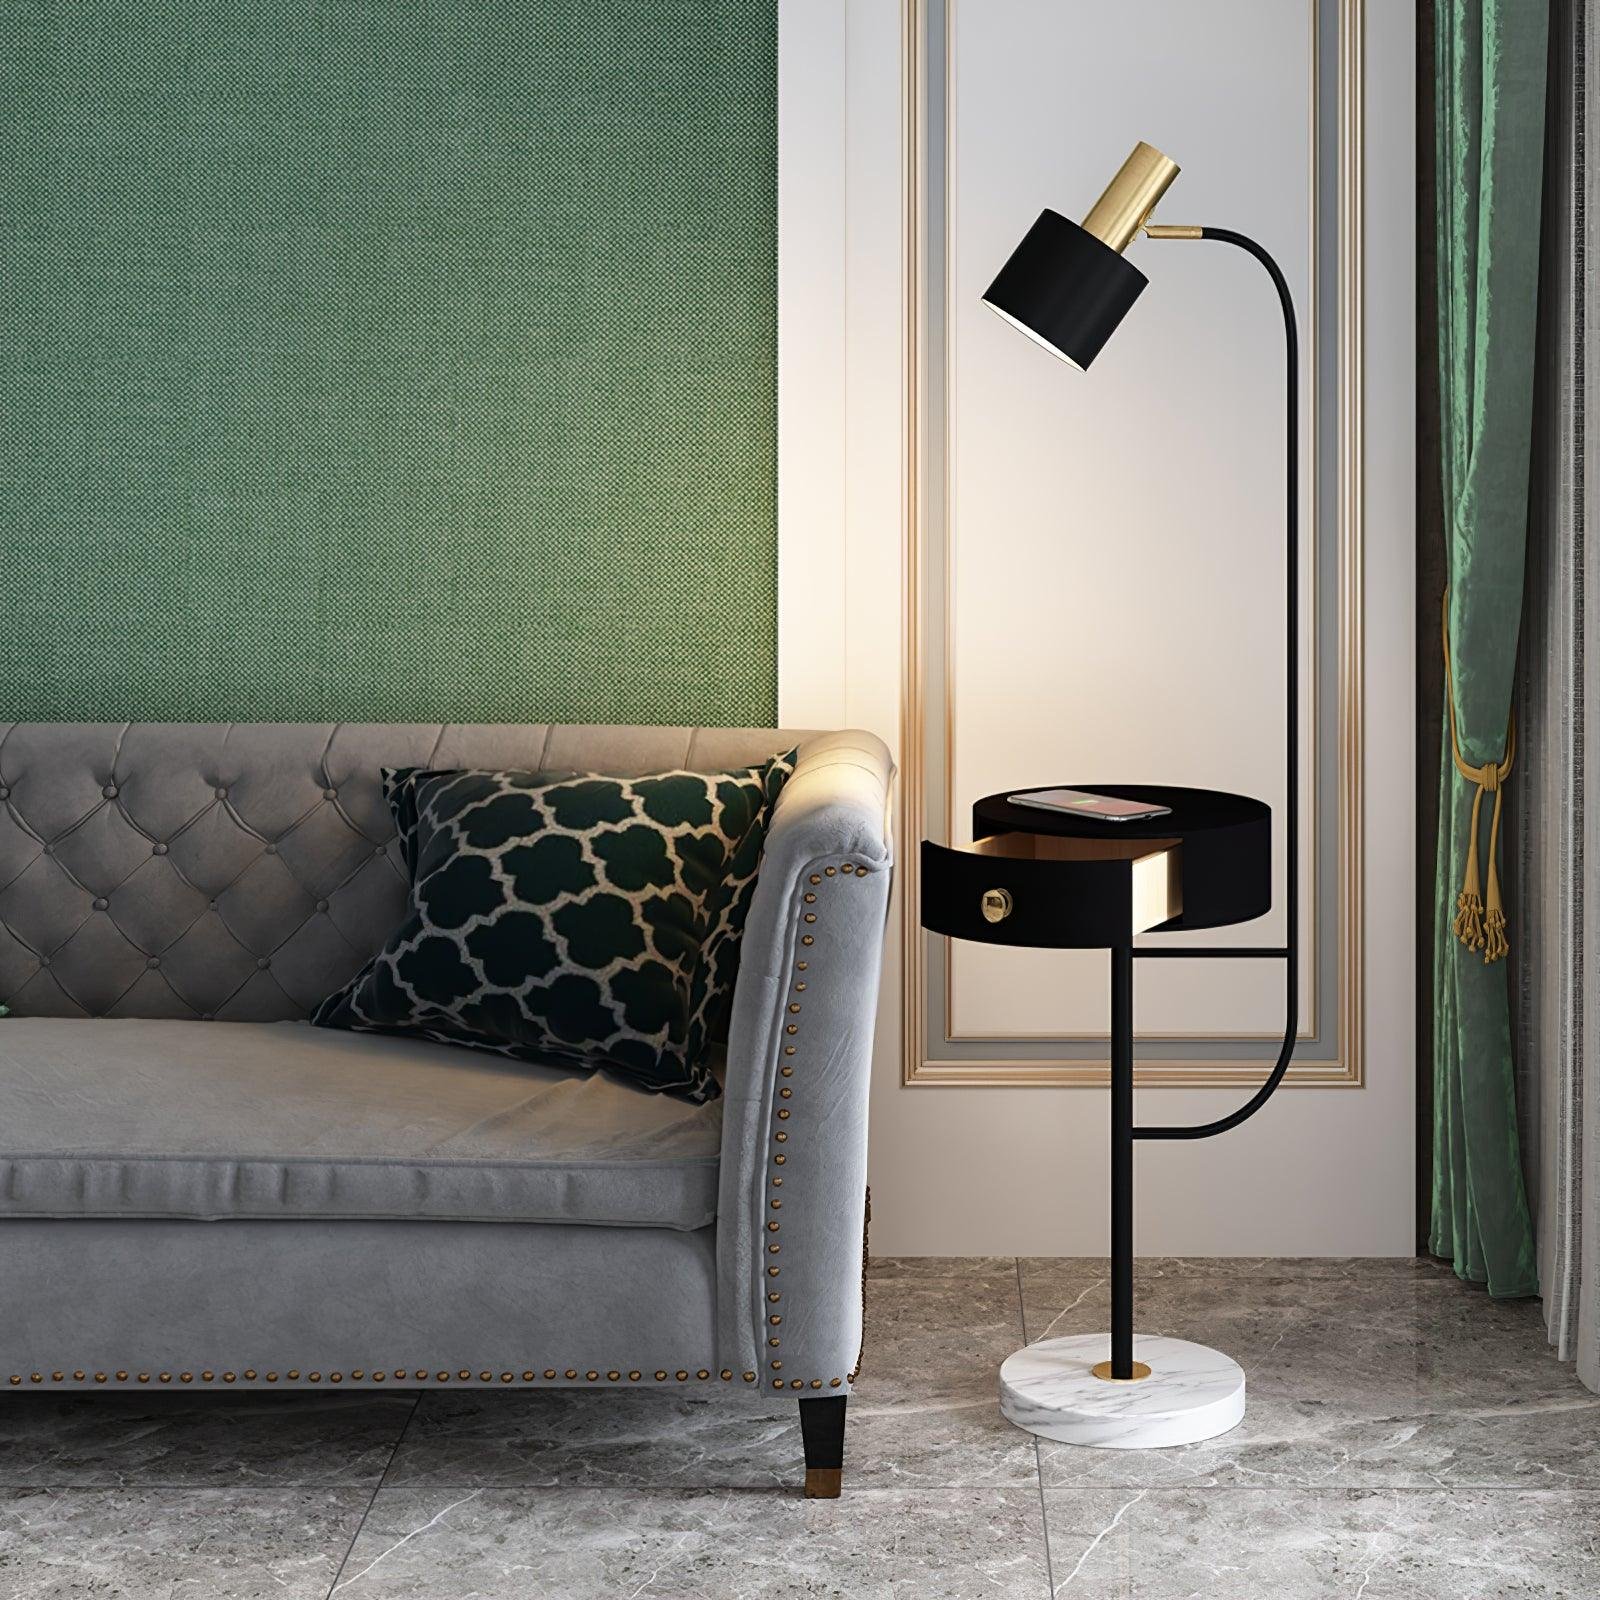 Black Agueda Floor Lamp with UK Plug, measuring 11.8 inches in diameter and 59 inches in height (30cm x 150cm)